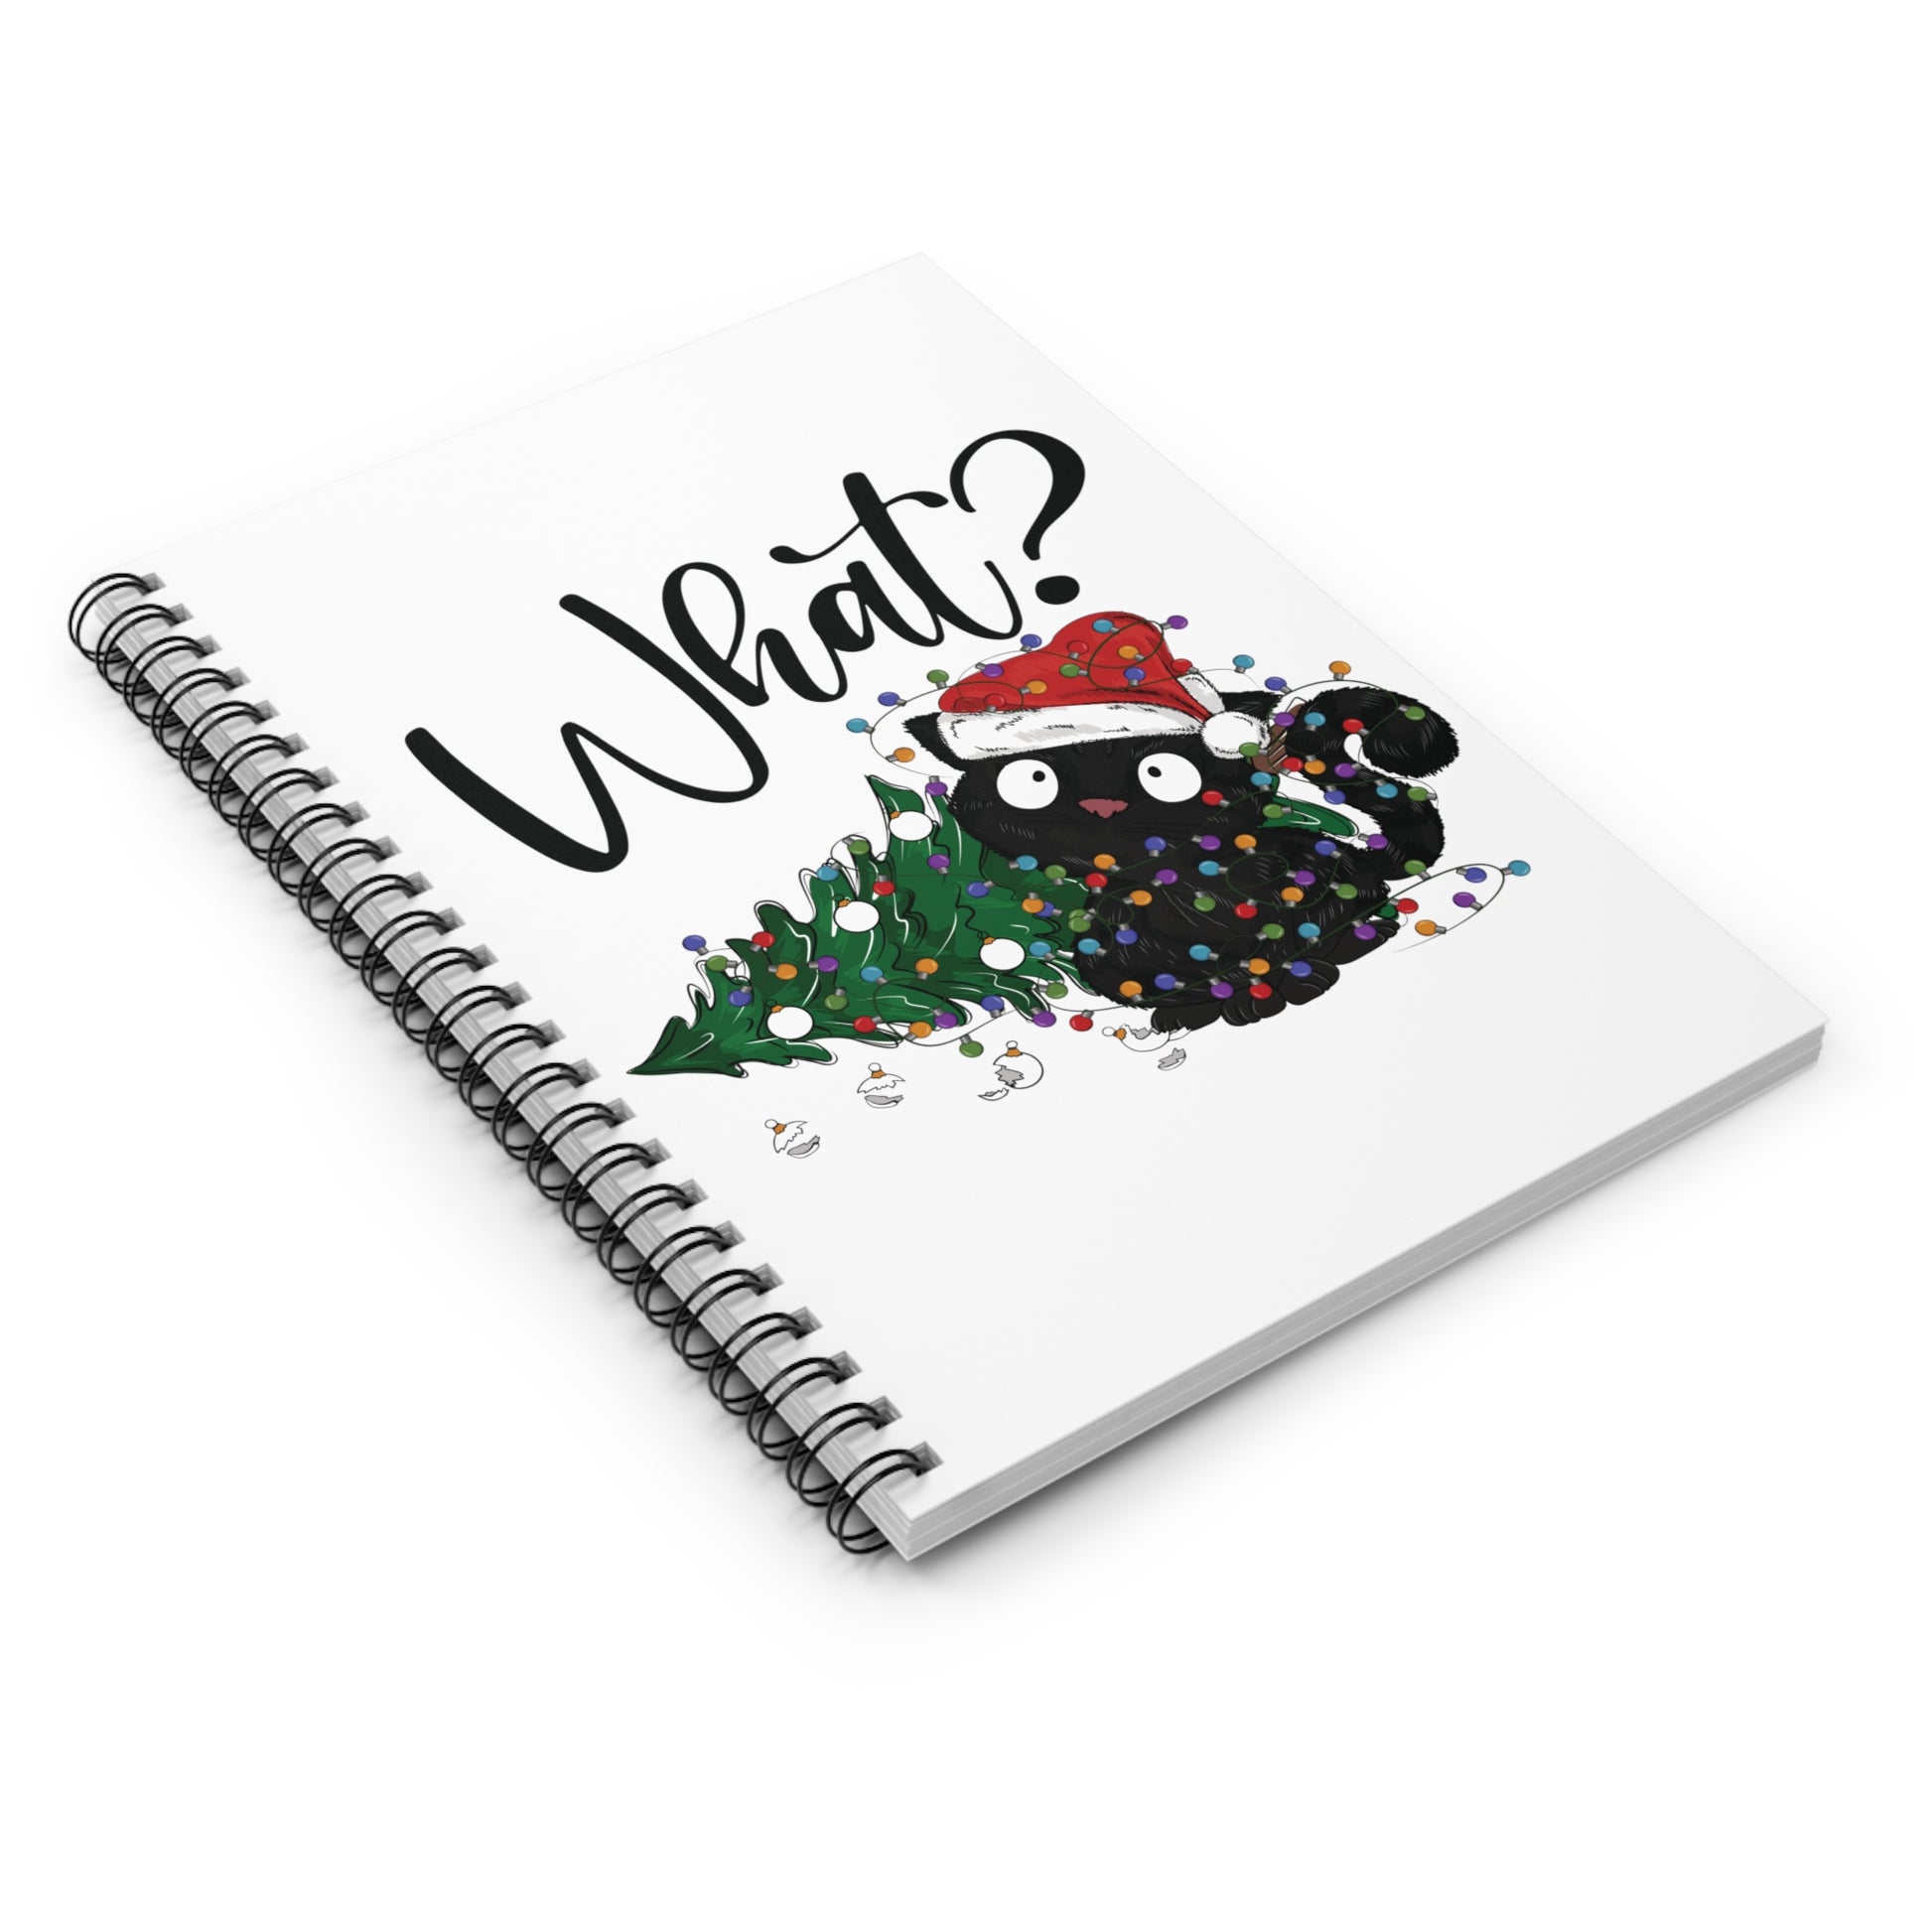 Christmas Cat: Spiral Notebook - Log Books - Journals - Diaries - and More Custom Printed by TheGlassyLass